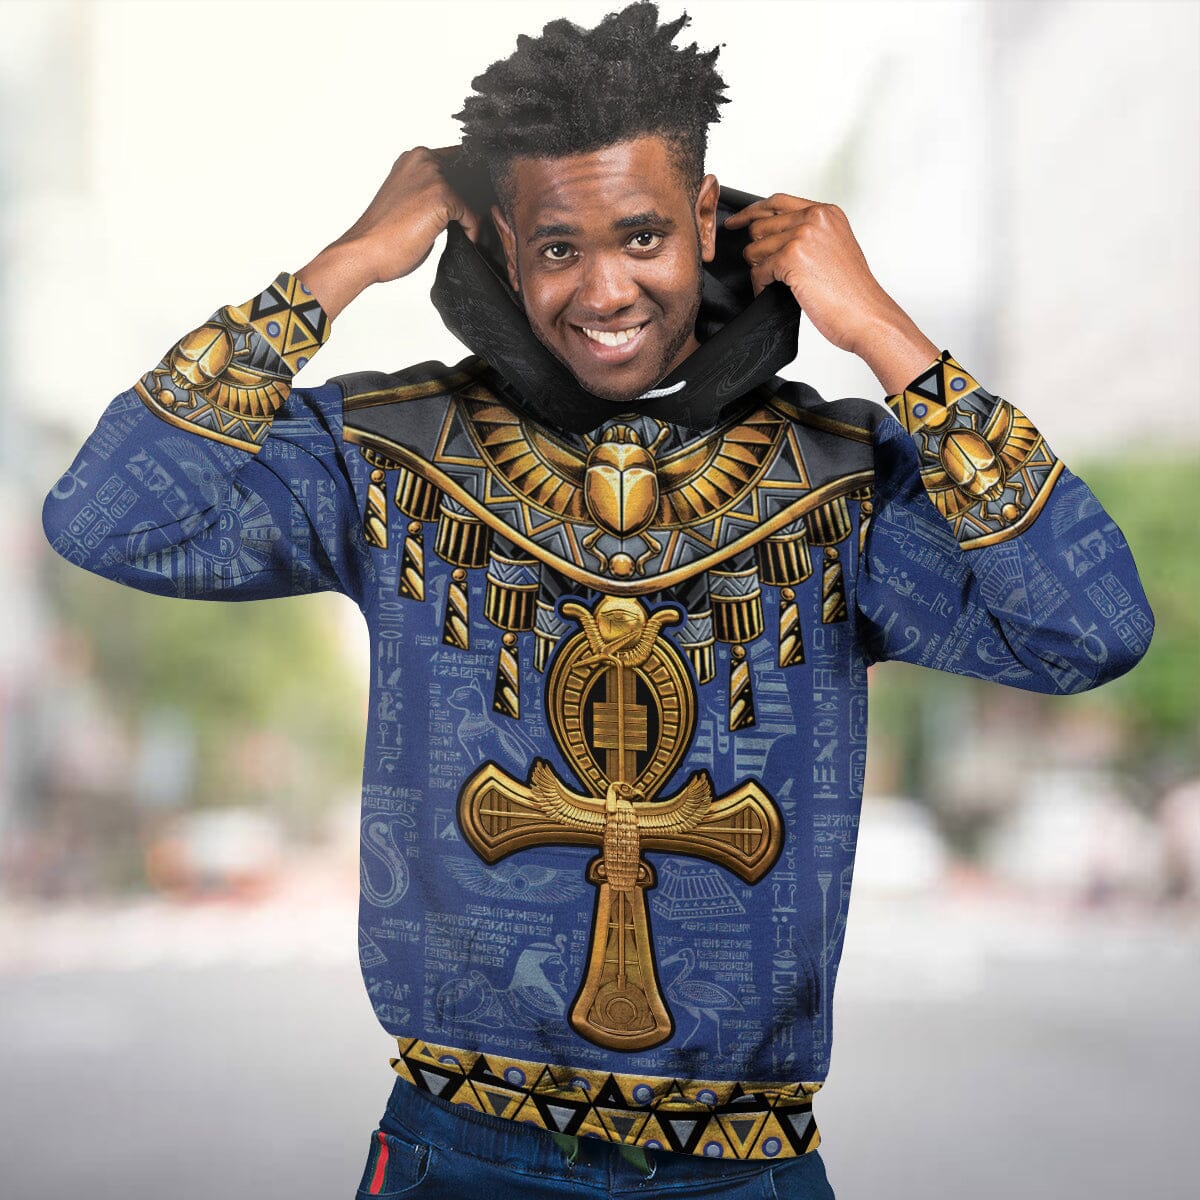 Egyptian Hieroglyphic Ankh All-over Hoodie Hoodie Tianci 